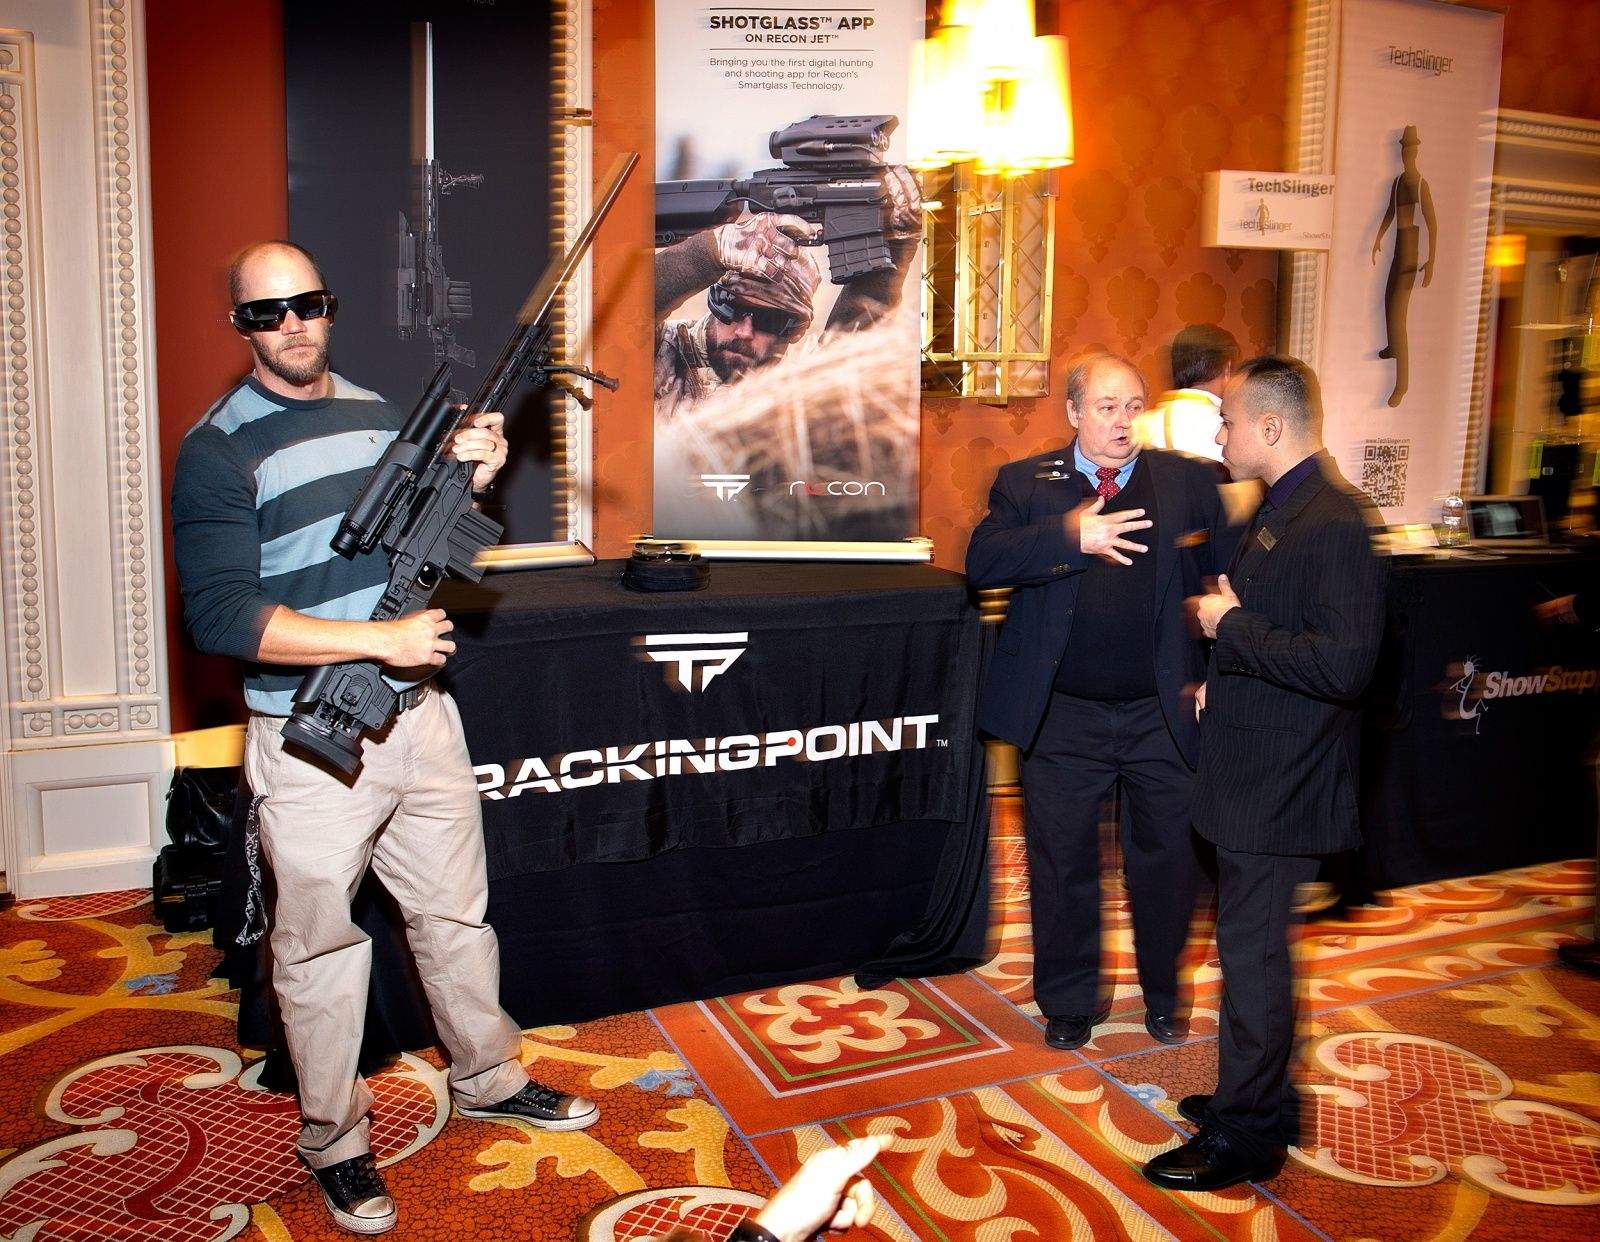 TrackingPoint’s Internet-connected rifles promise accuracy and 